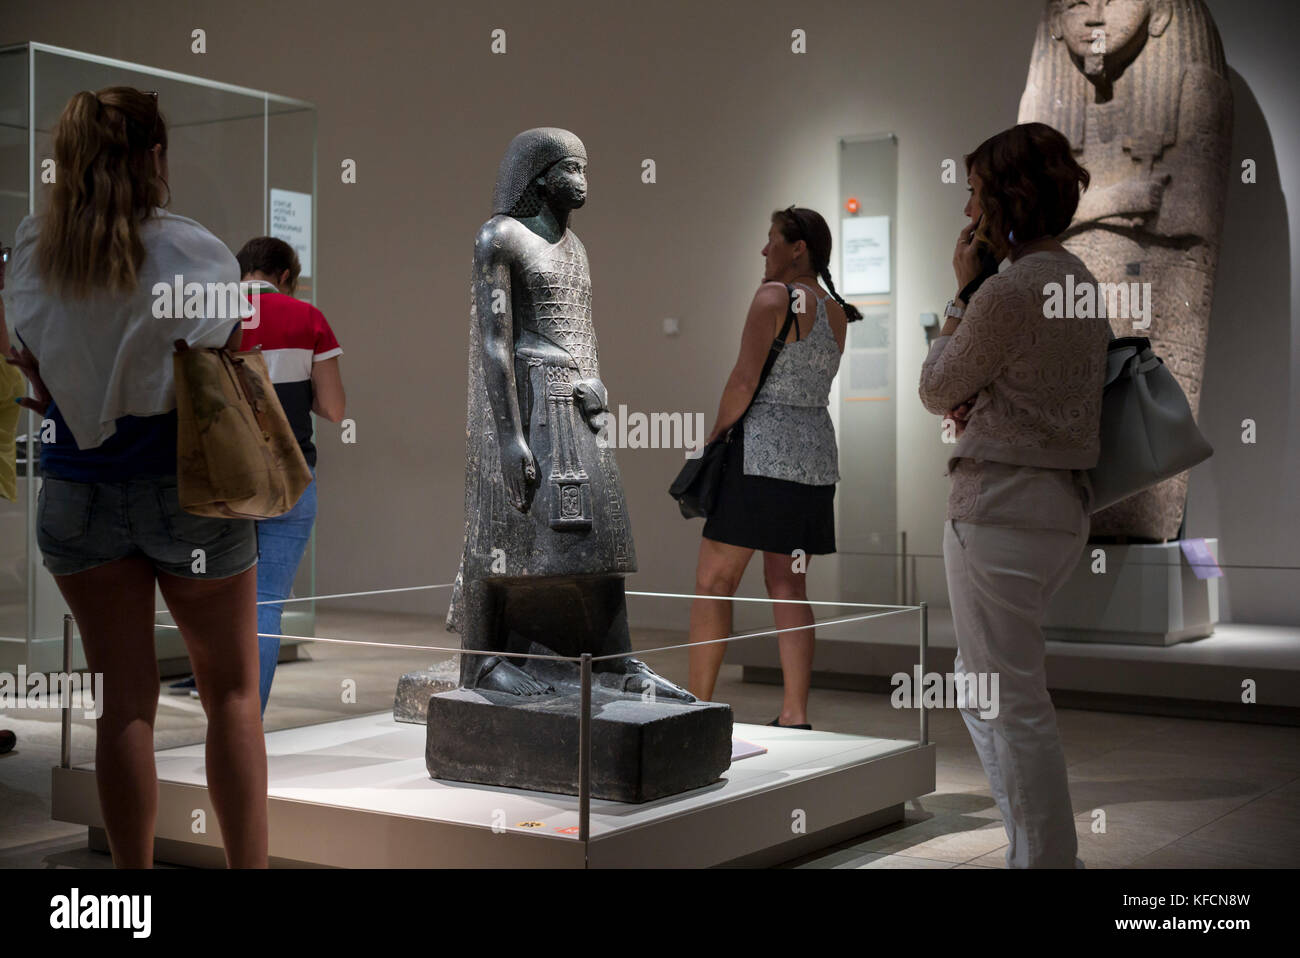 Turin. Italy. Visitors at the Museo Egizio (Egyptian Museum) looking at exhibits.  Pictured, egyptian statue of Aanen, second priest of Amon. New King Stock Photo